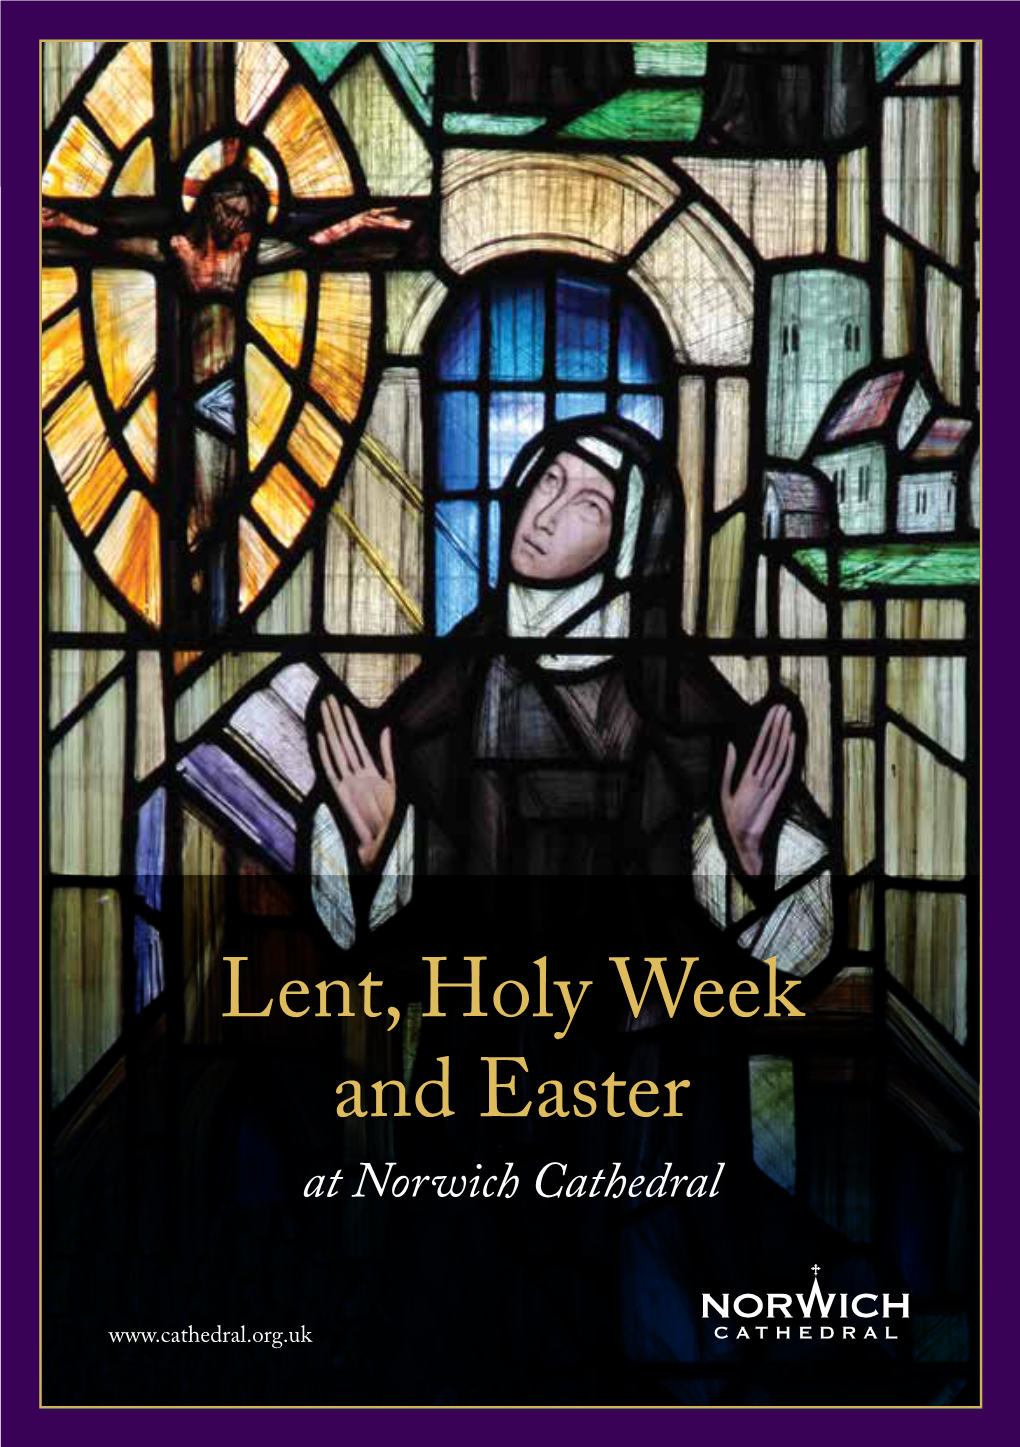 Lent, Holy Week and Easter at Norwich Cathedral